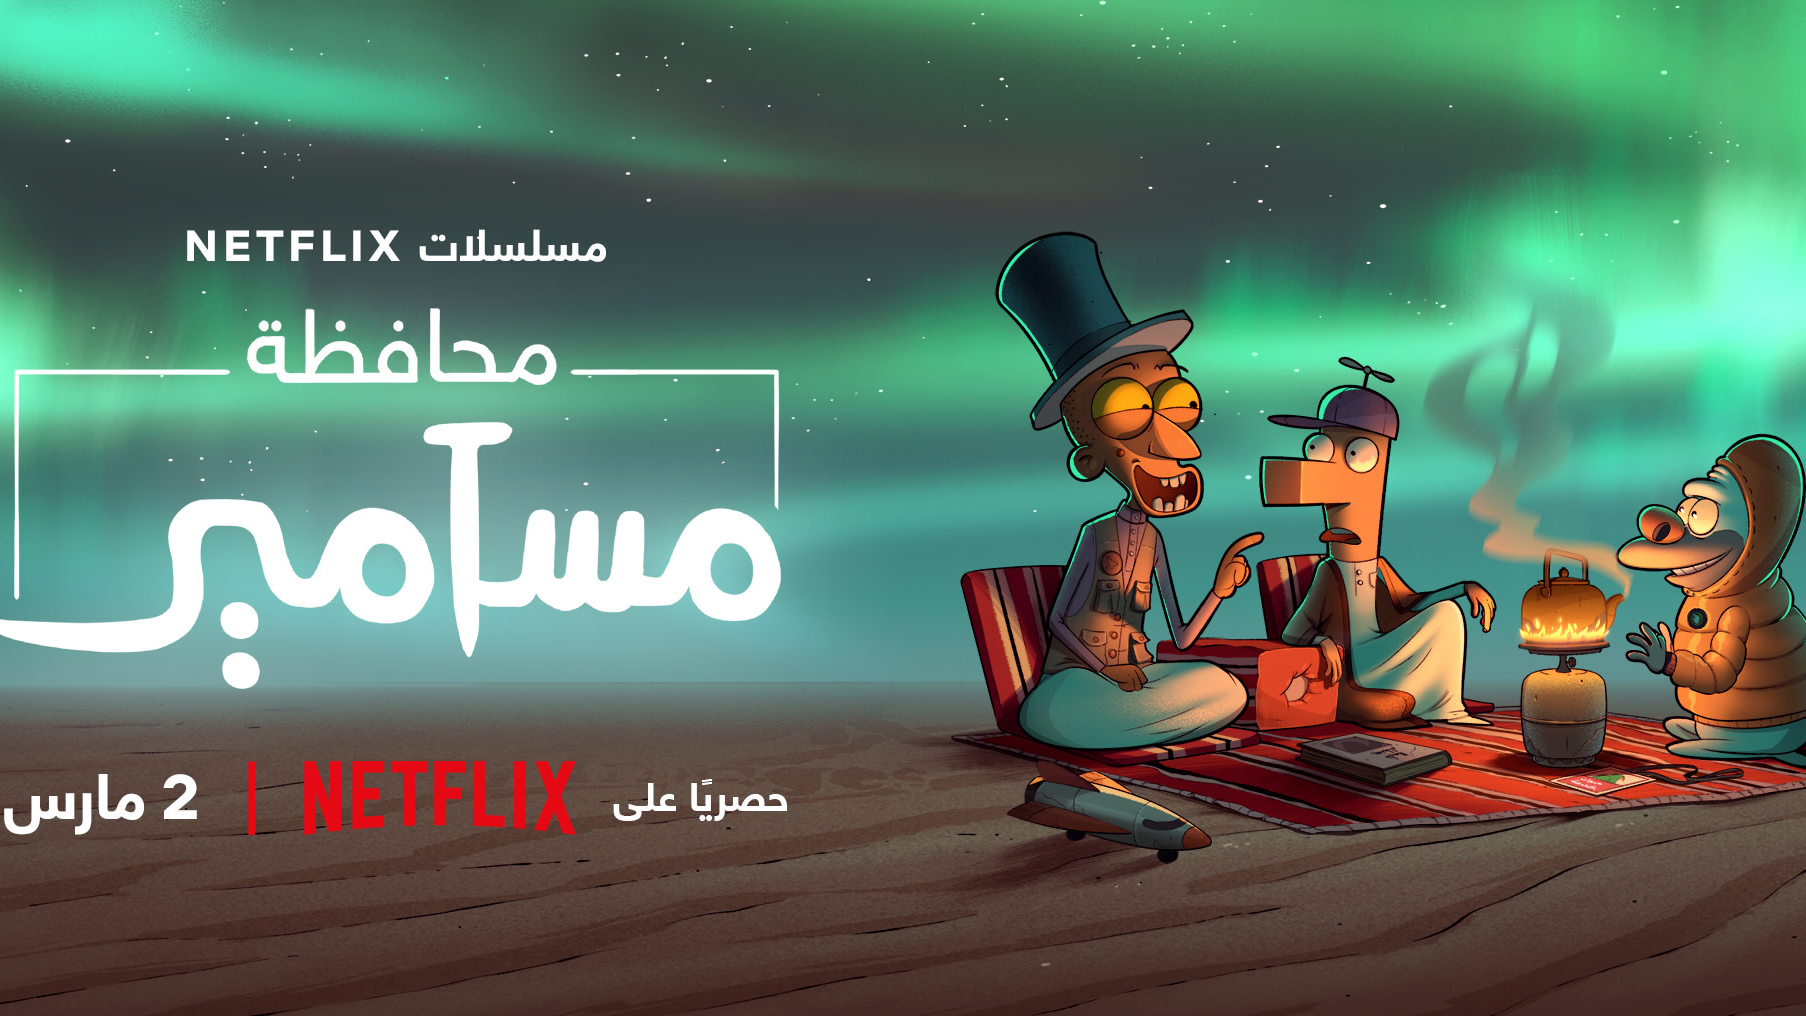 https://adgully.me/post/1507/netflix-releases-trailer-of-saudi-animation-series-masameer-county